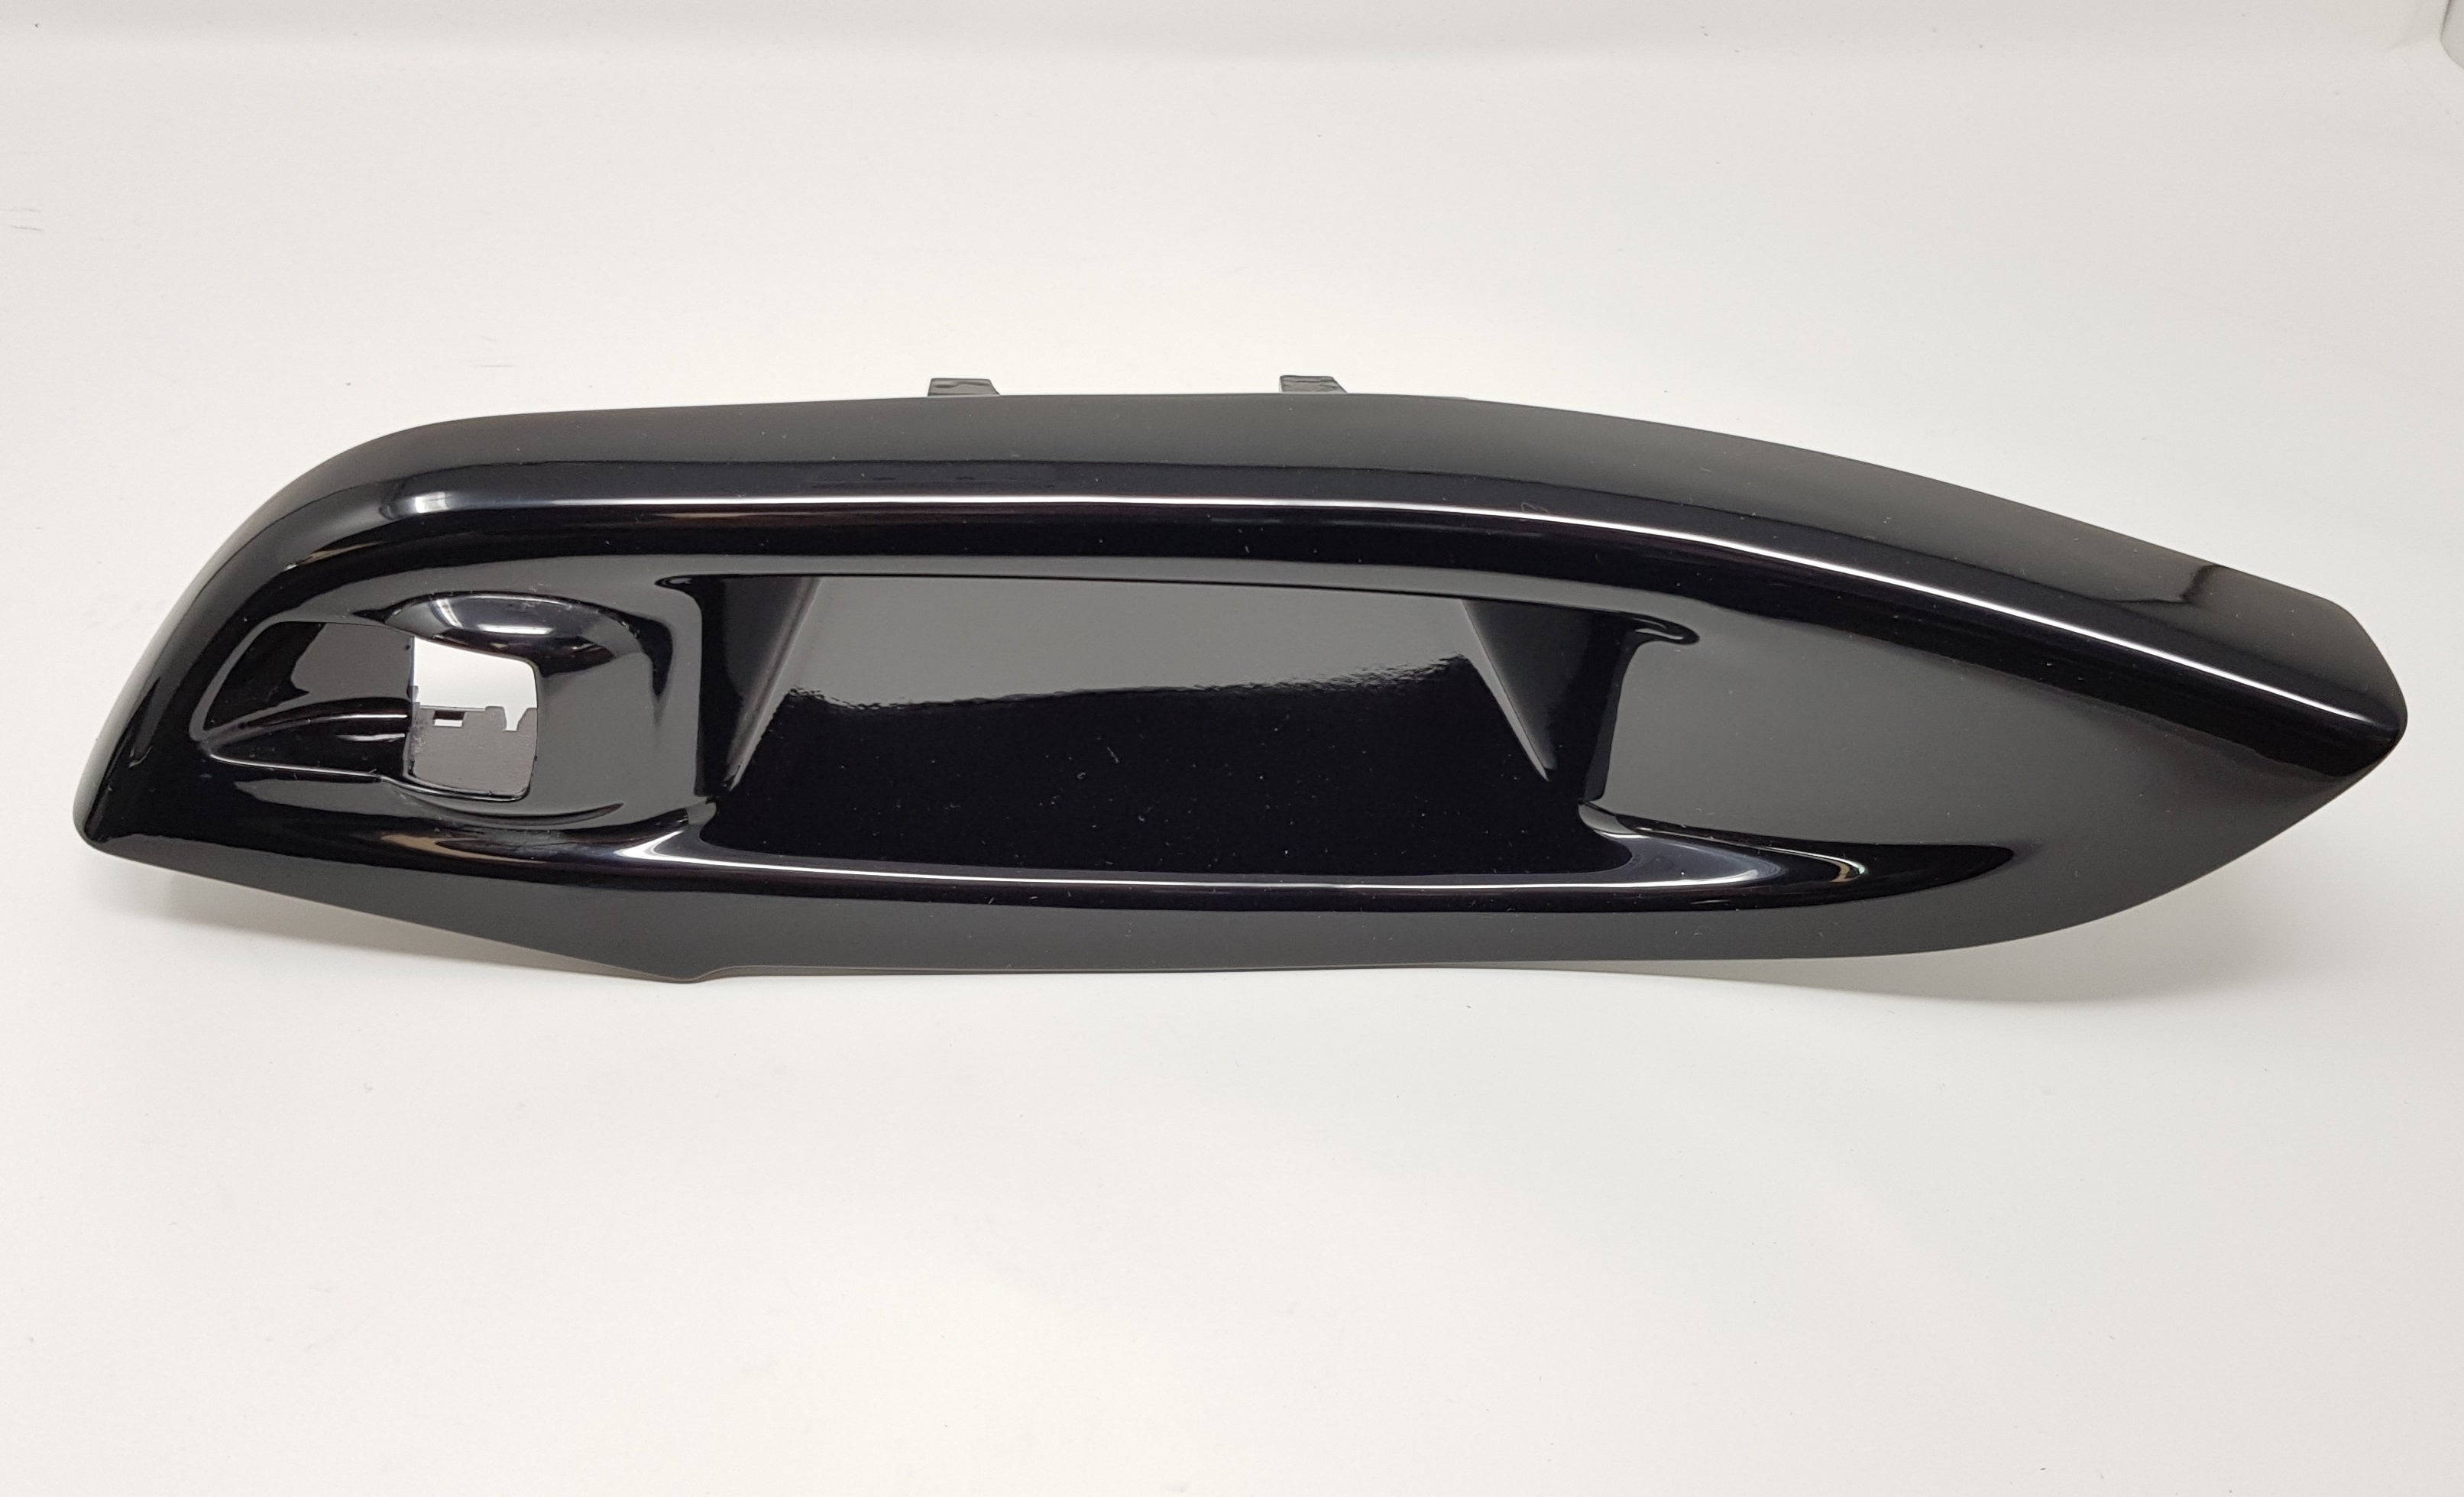 Genuine Ford Interior Rear Door Handle Trims - Mk3/3.5 Ford Focus (Painted/Hydrodipped Finishes)